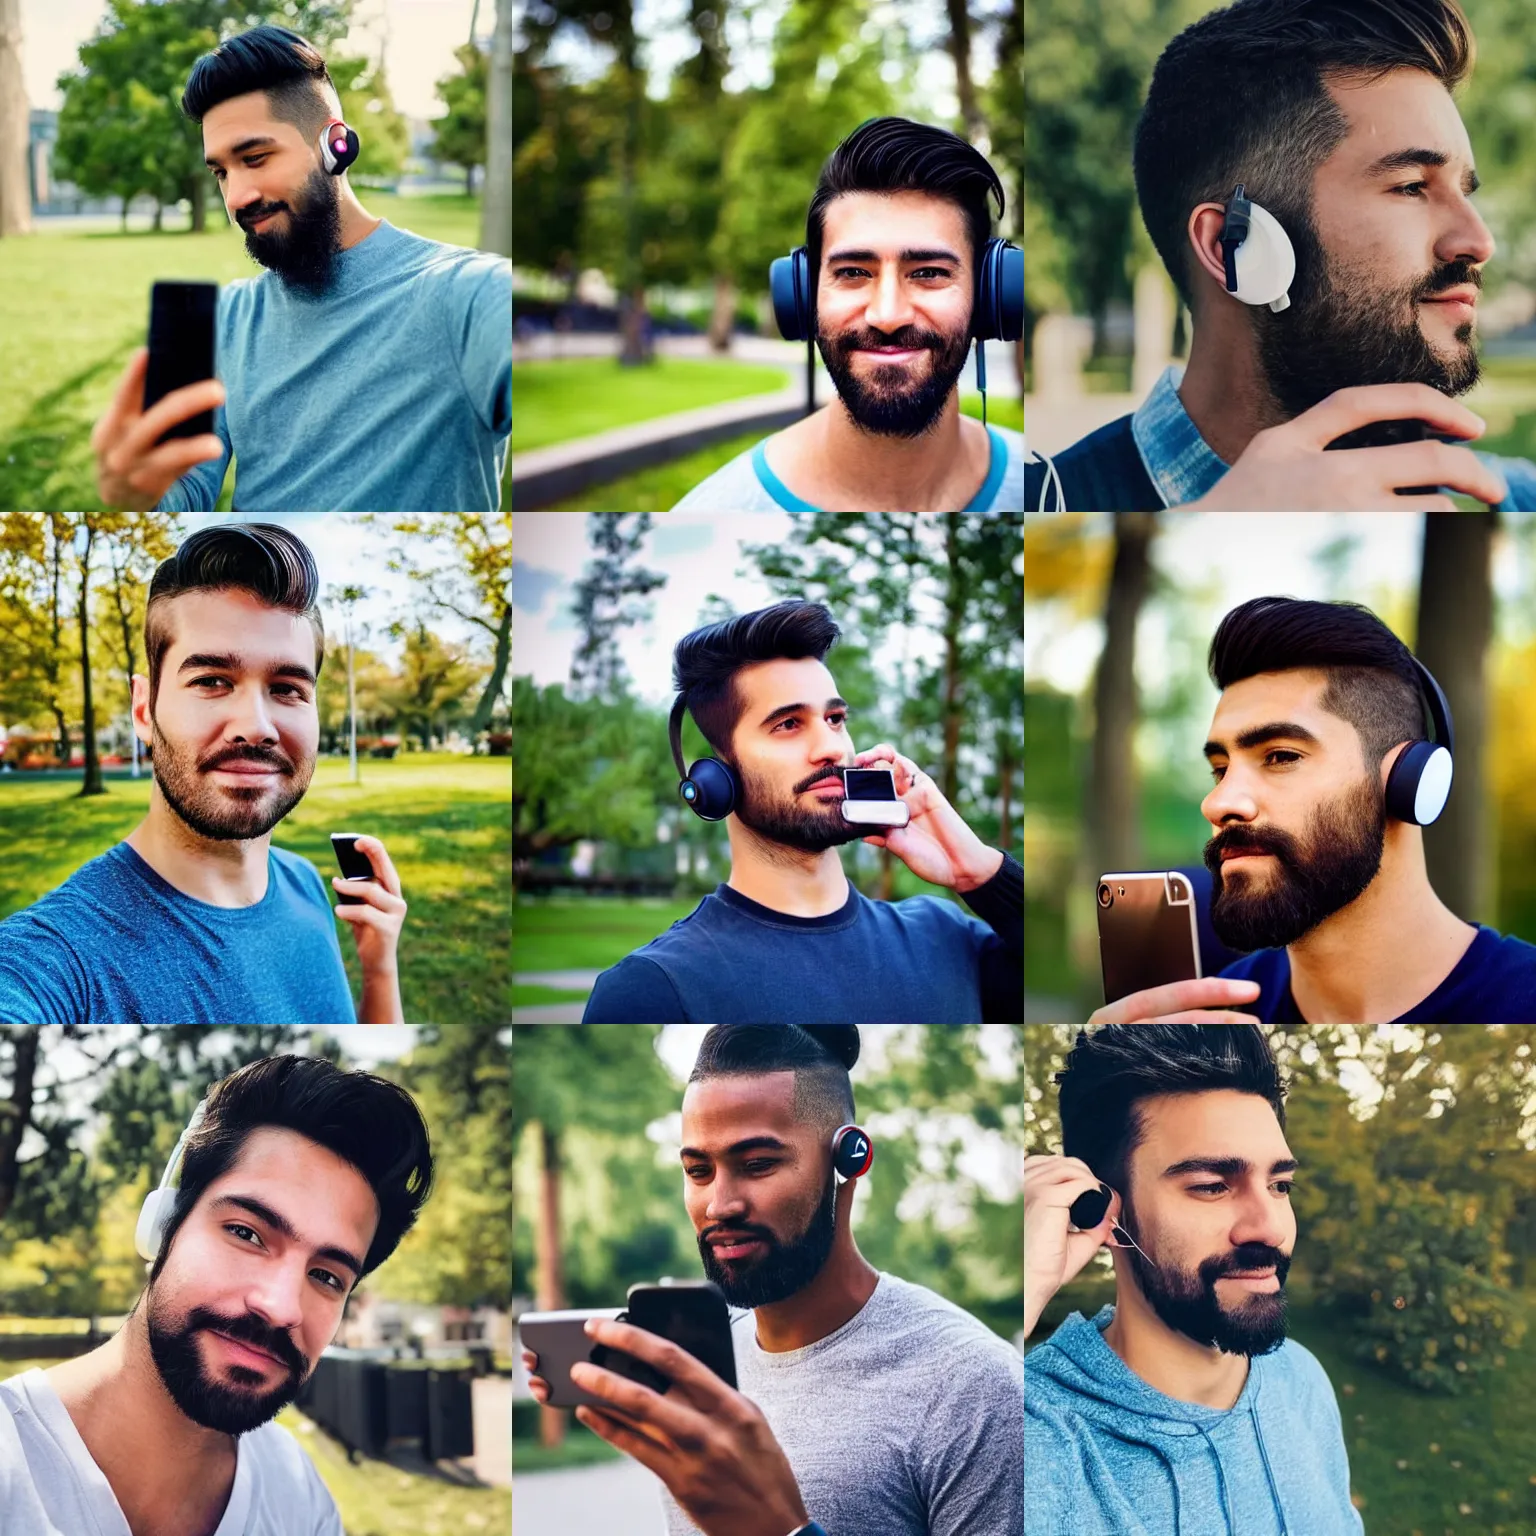 Prompt: modern color fine details iphone 12 Pro selfie photograph of a perfect and handsome 30 year old man with some facial hair, wearing earbuds, taking a selfie in a park on an iPhone 12 Pro, modern HD cell phone photograph in color, instagram, IQ4, 150MP, 50mm, F1.4, ISO 200, 1/160s, natural light, Adobe Photoshop, Adobe Lightroom, photolab, Affinity Photo, PhotoDirector 365